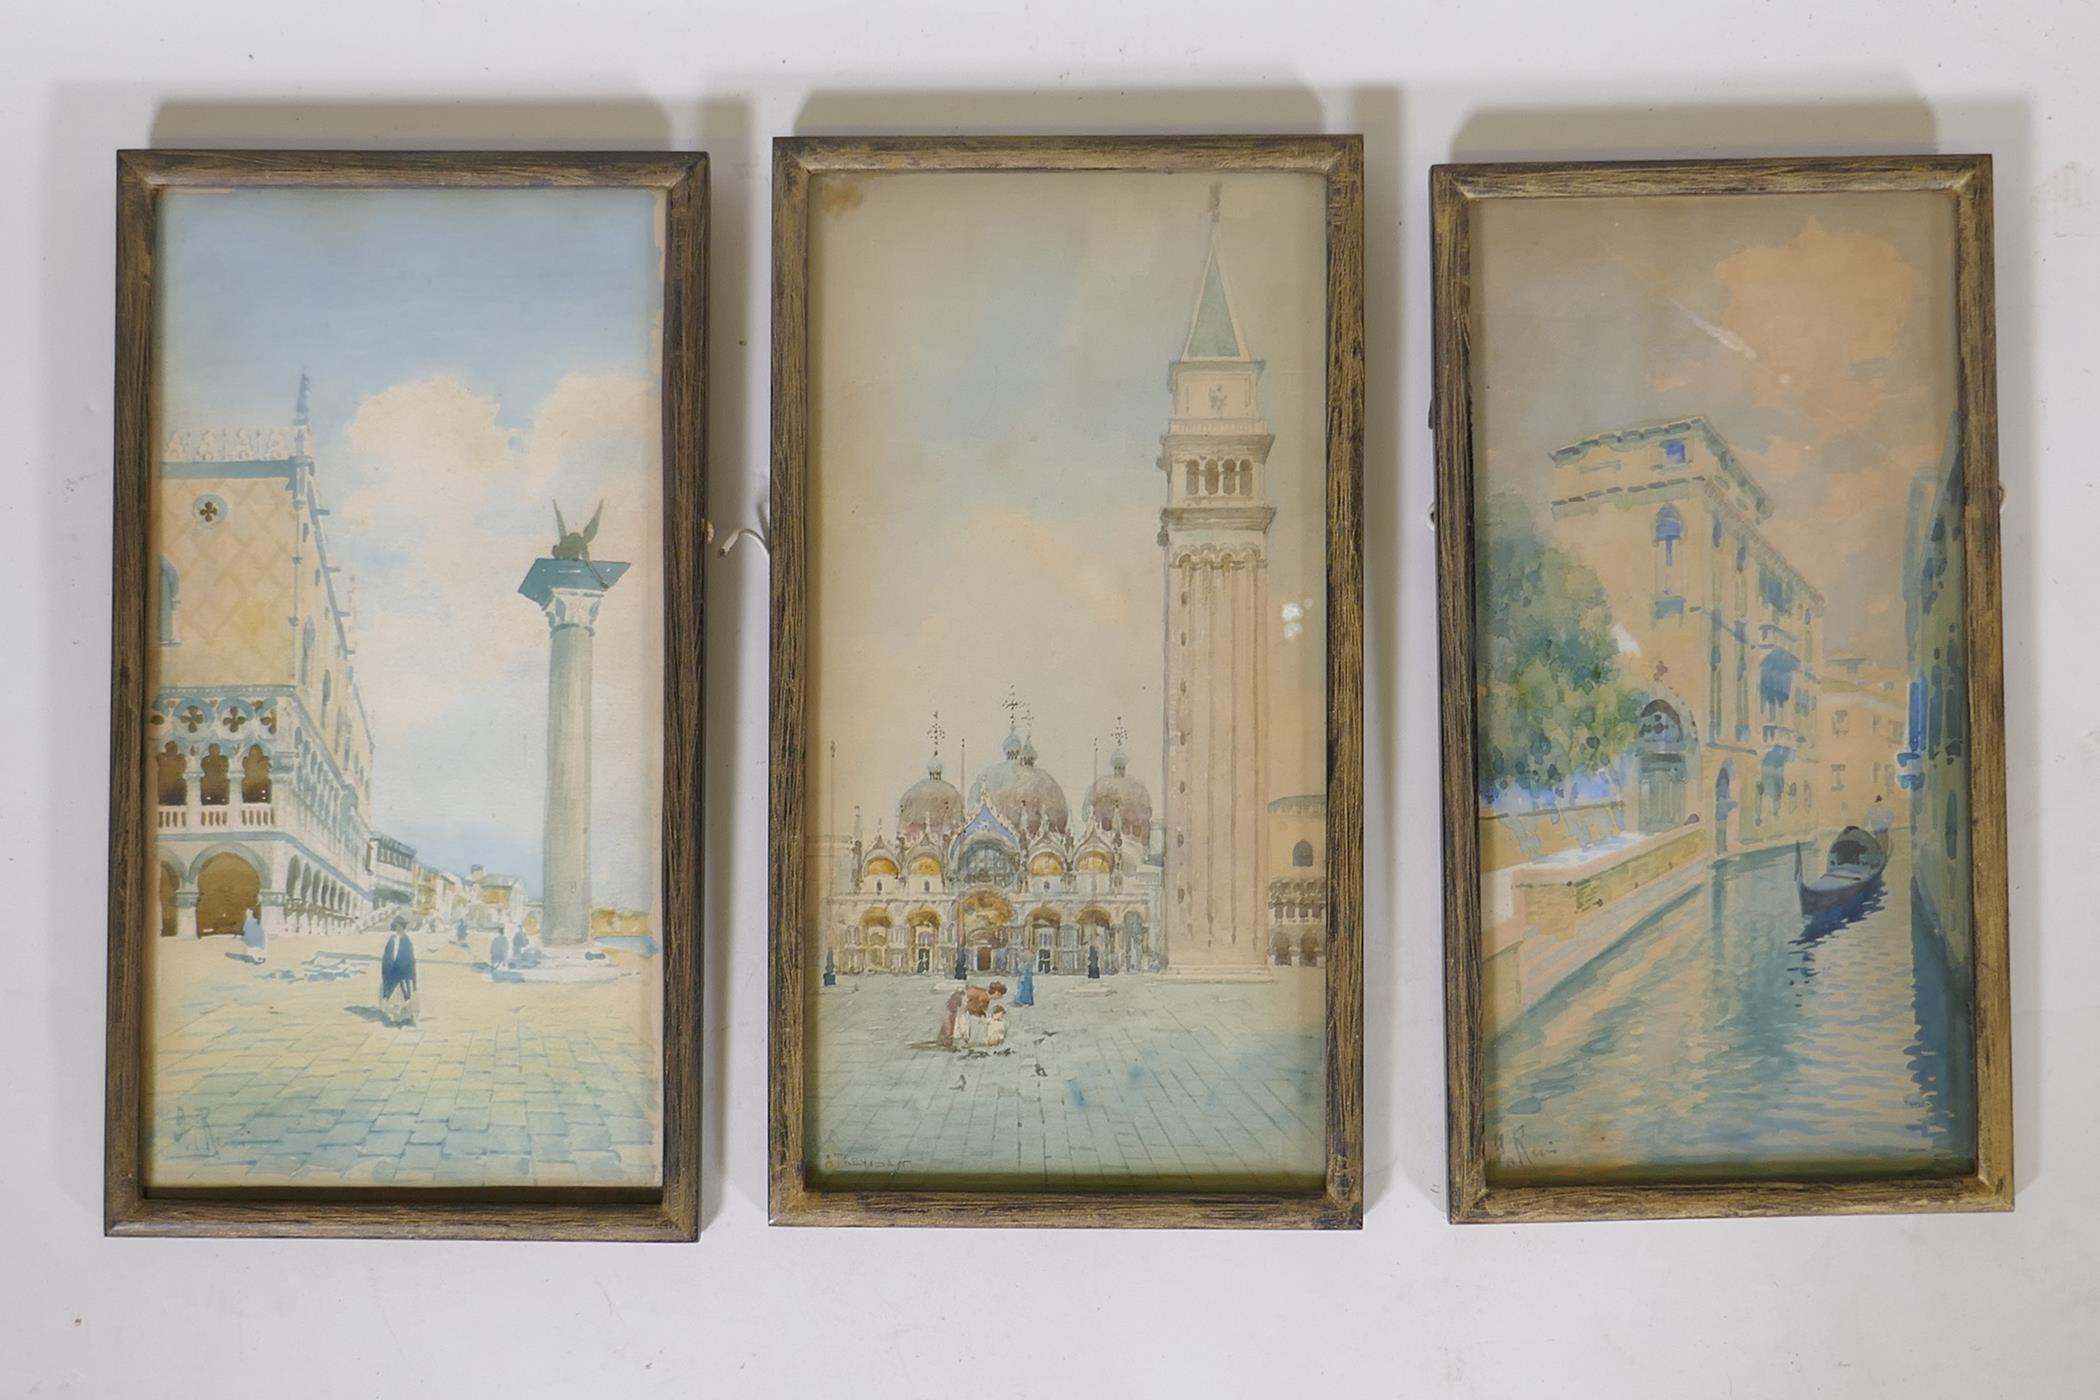 Alberto Trevisant, Venetian scene with St Mark's Square, signed, 6" x 12", and two similar, signed